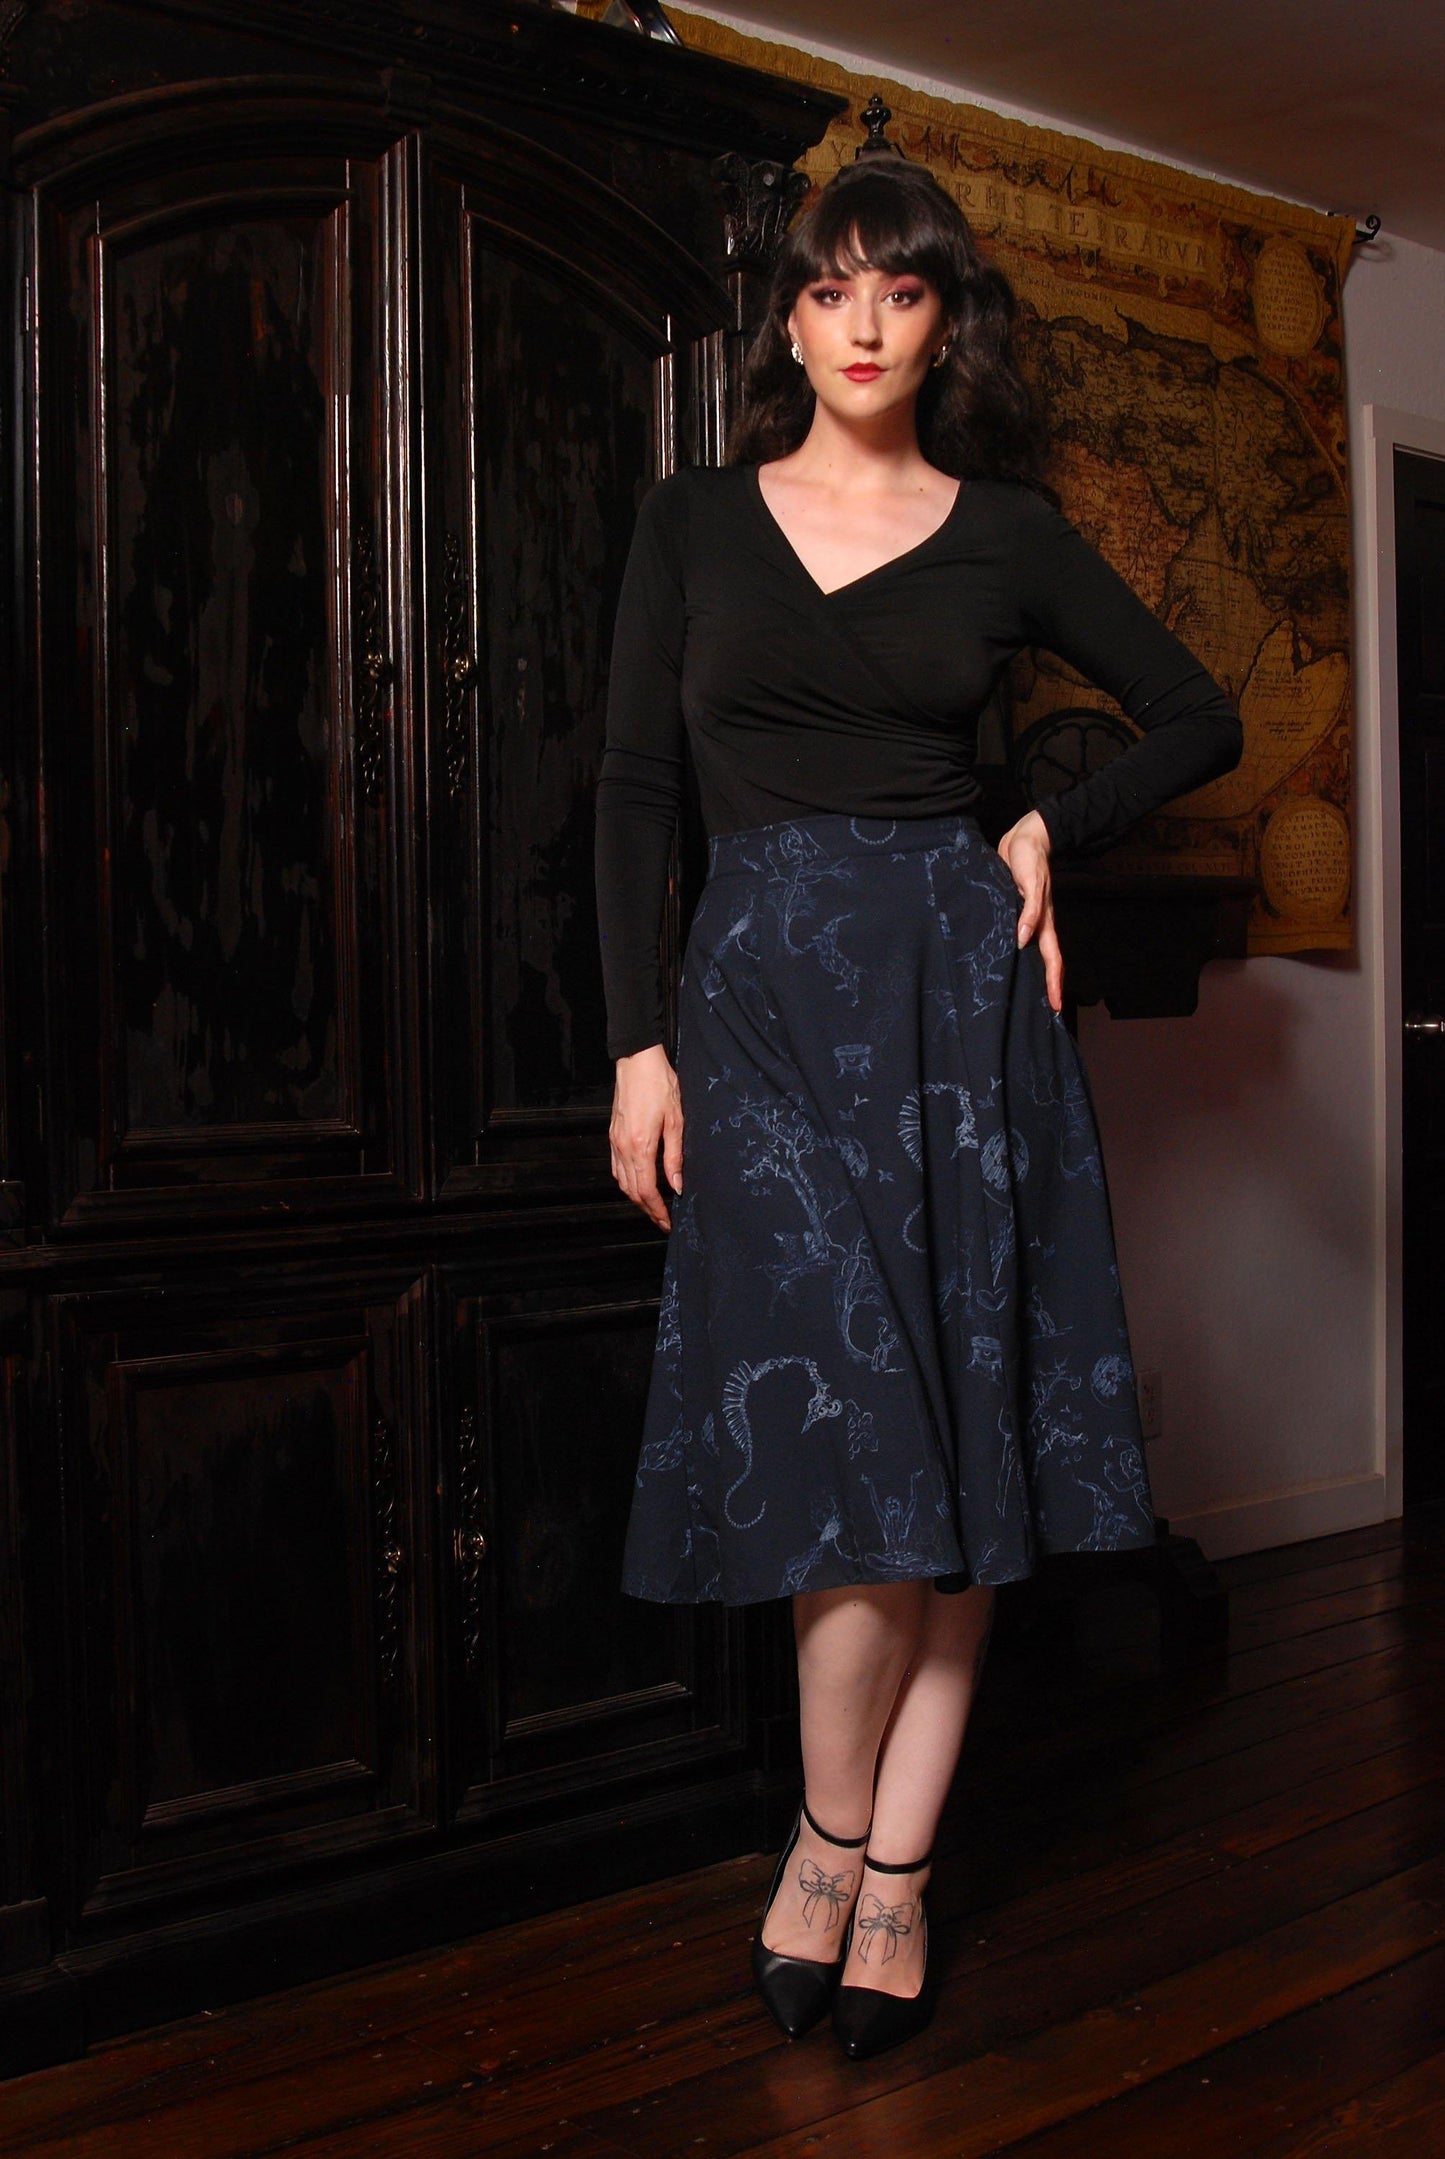 Viva 40s Tulip Skirt in Blue & Silver Witchy Toile Print | Laura Byrnes - pinupgirlclothing.com